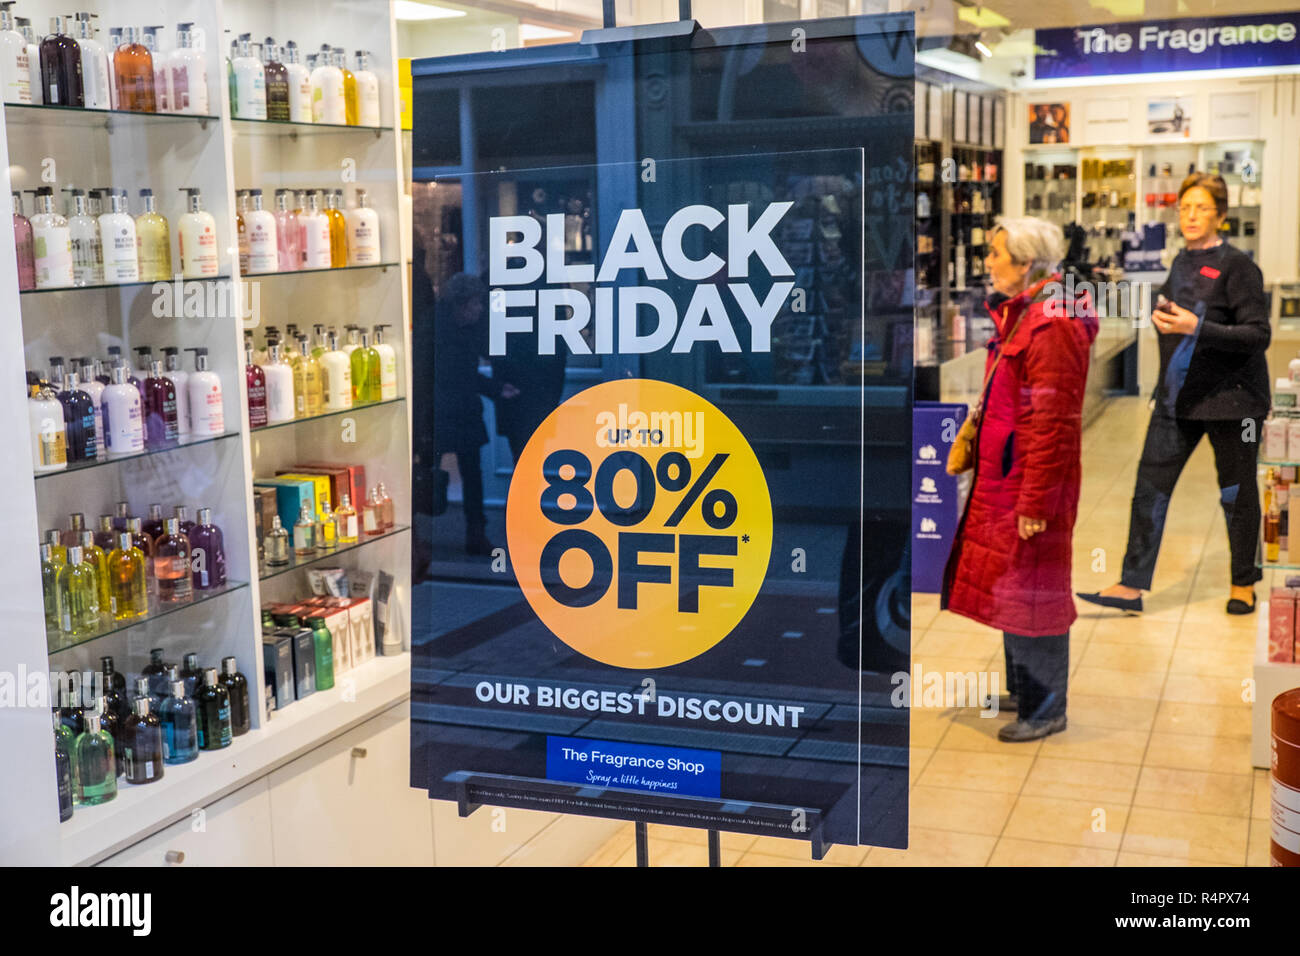 Black Friday,Bournemouth,England,UK.Huge discounts available on selected items at The Fragrance Shop,House of Fraser,Old Christchurch Road,Bournemouth Stock Photo